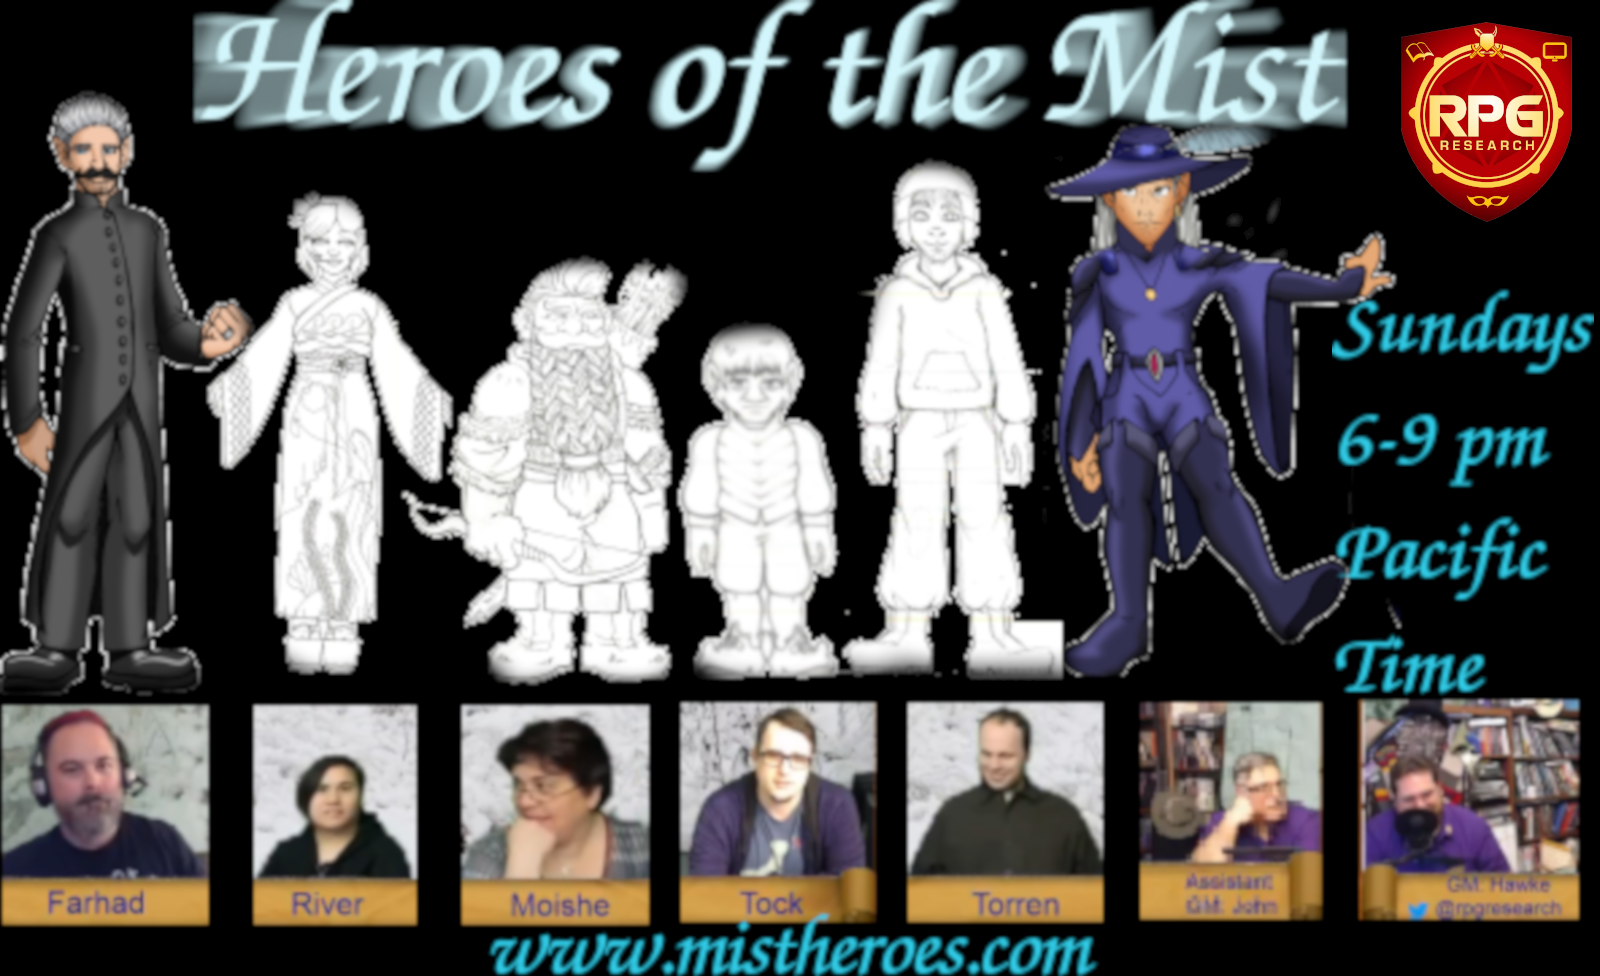 Heroes-of-the-mist-rough-banner-hawke-20190330e-1600w976h300d-fuzzyresampled-need-doover-20190415-rpgresearch-logo.png